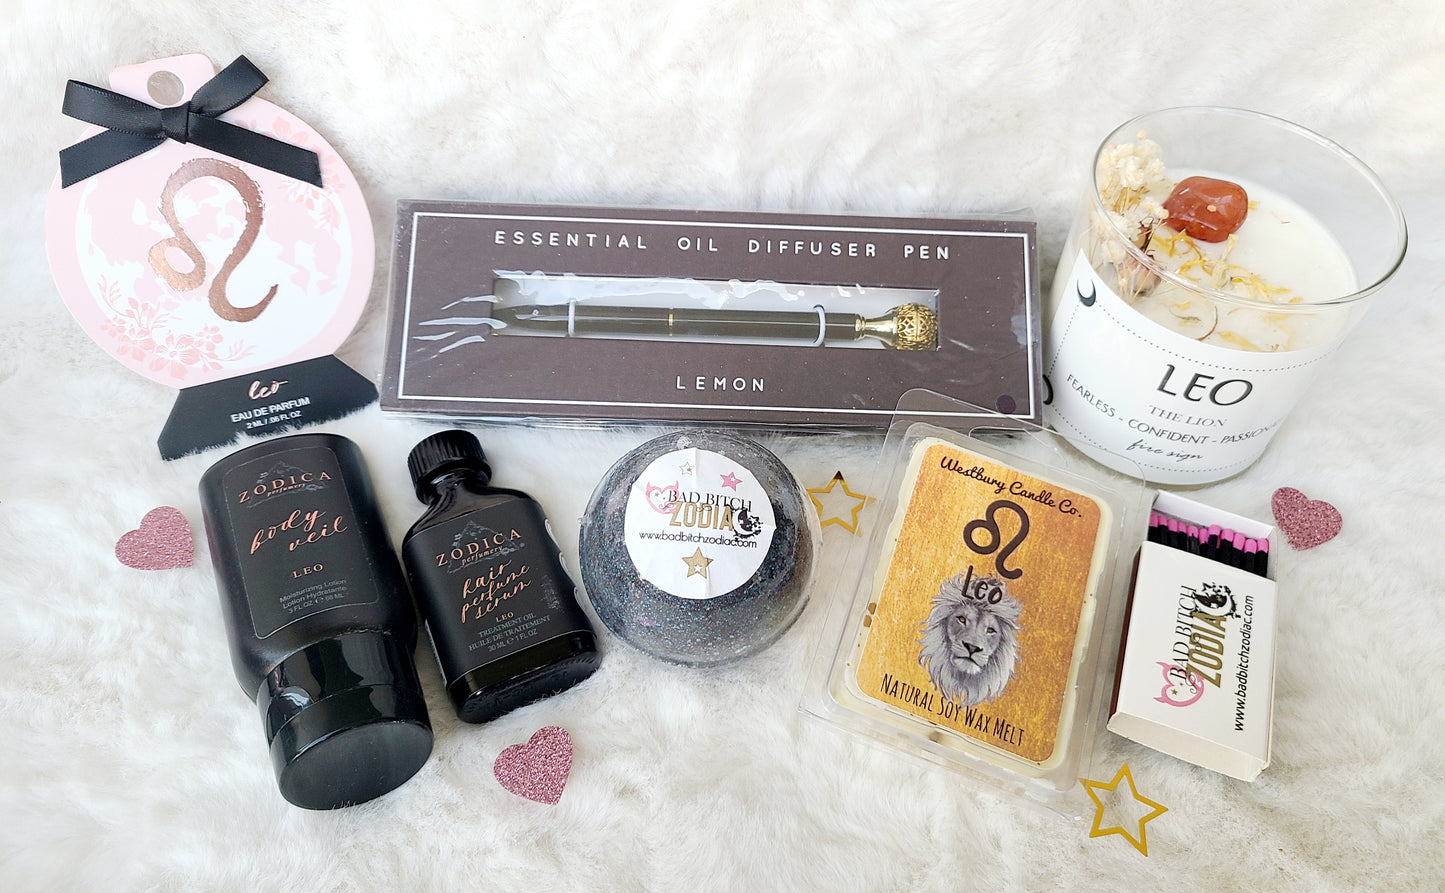 All The Smell Goods Aromatherapy Gift Set - Leo